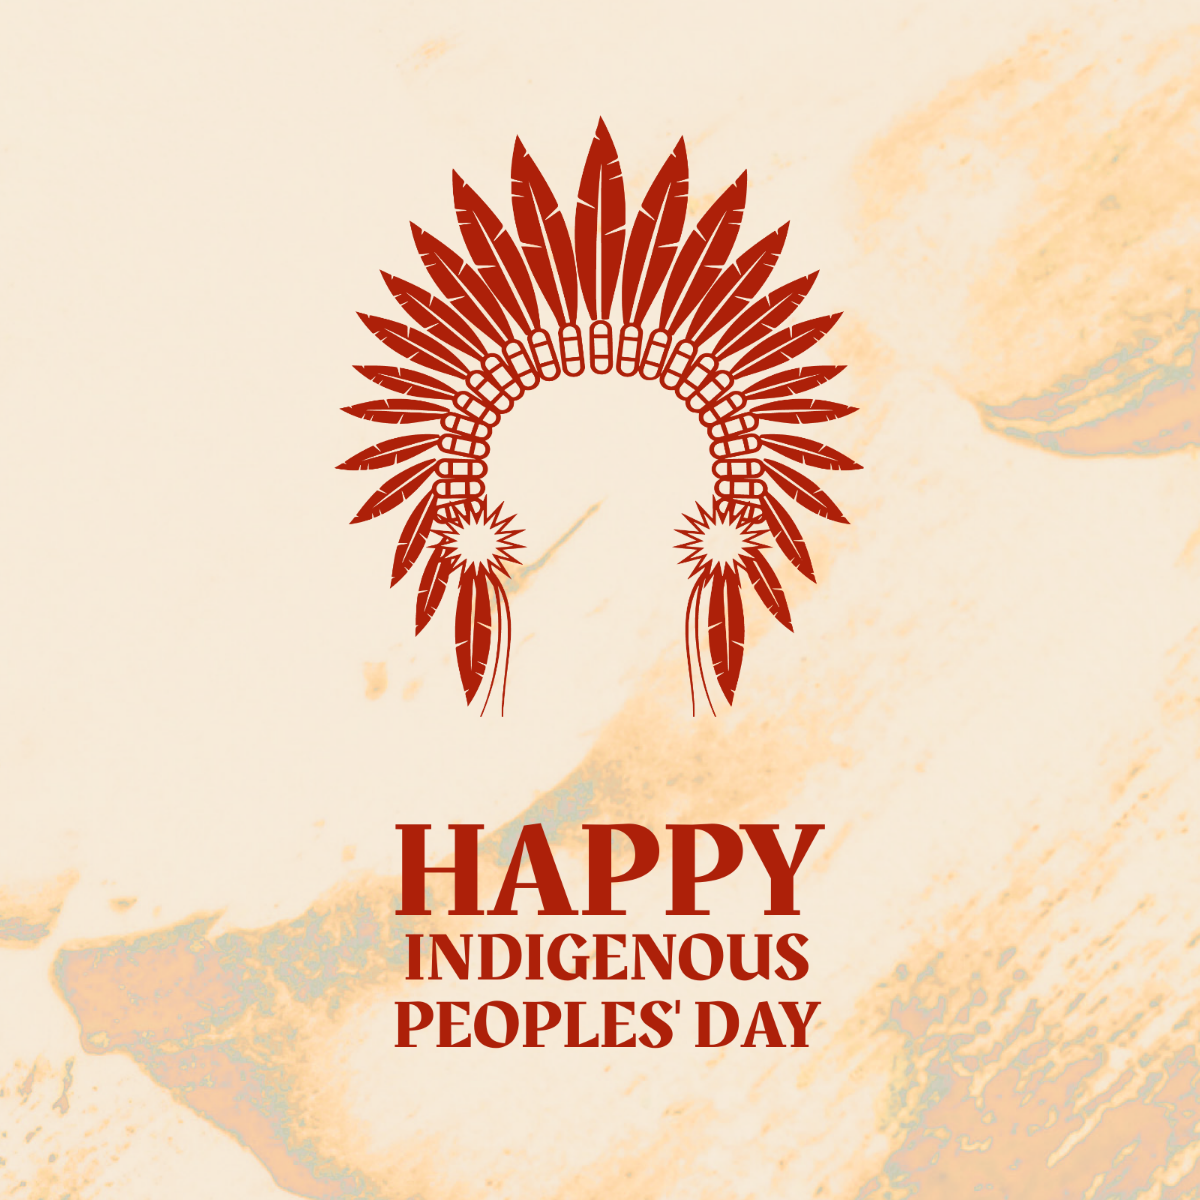 Indigenous Peoples' Day WhatsApp Post Template